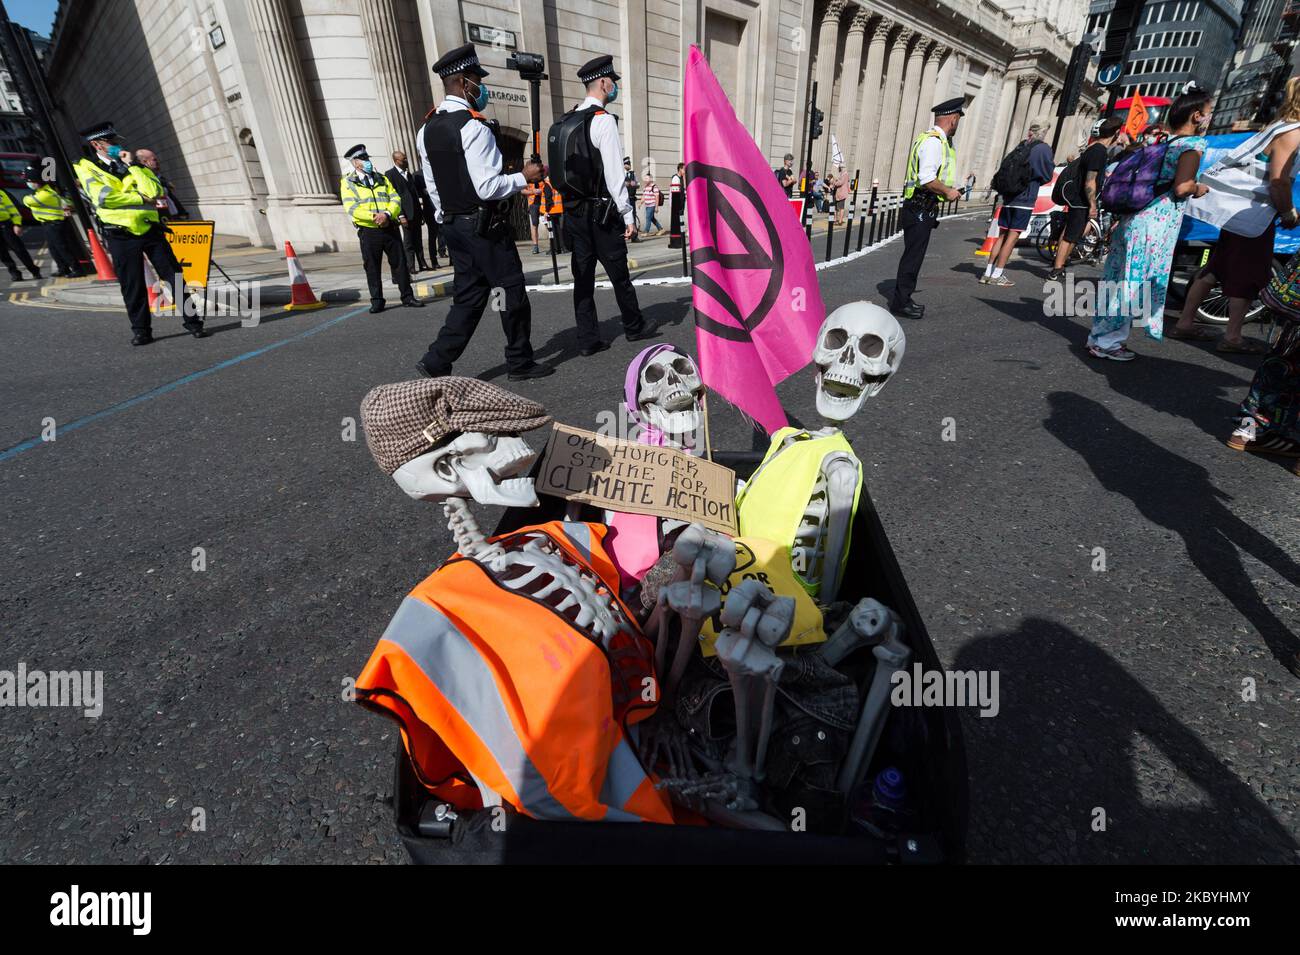 Three skeletons with a message saying 'On hunger strike for climate action' are seen during the Extinction Rebellion march through central London on the tenth and final day of mass protest action, on 10 September, 2020 in London, England. Extinction Rebellion carried out a series of disruptive actions over past ten days in a campaign to support the Climate and Ecological Emergency Bill, which would speed up the UK’s progress on reducing its carbon emissions, and hold a national citizens’ assembly on the crisis. (Photo by WIktor Szymanowicz/NurPhoto) Stock Photo